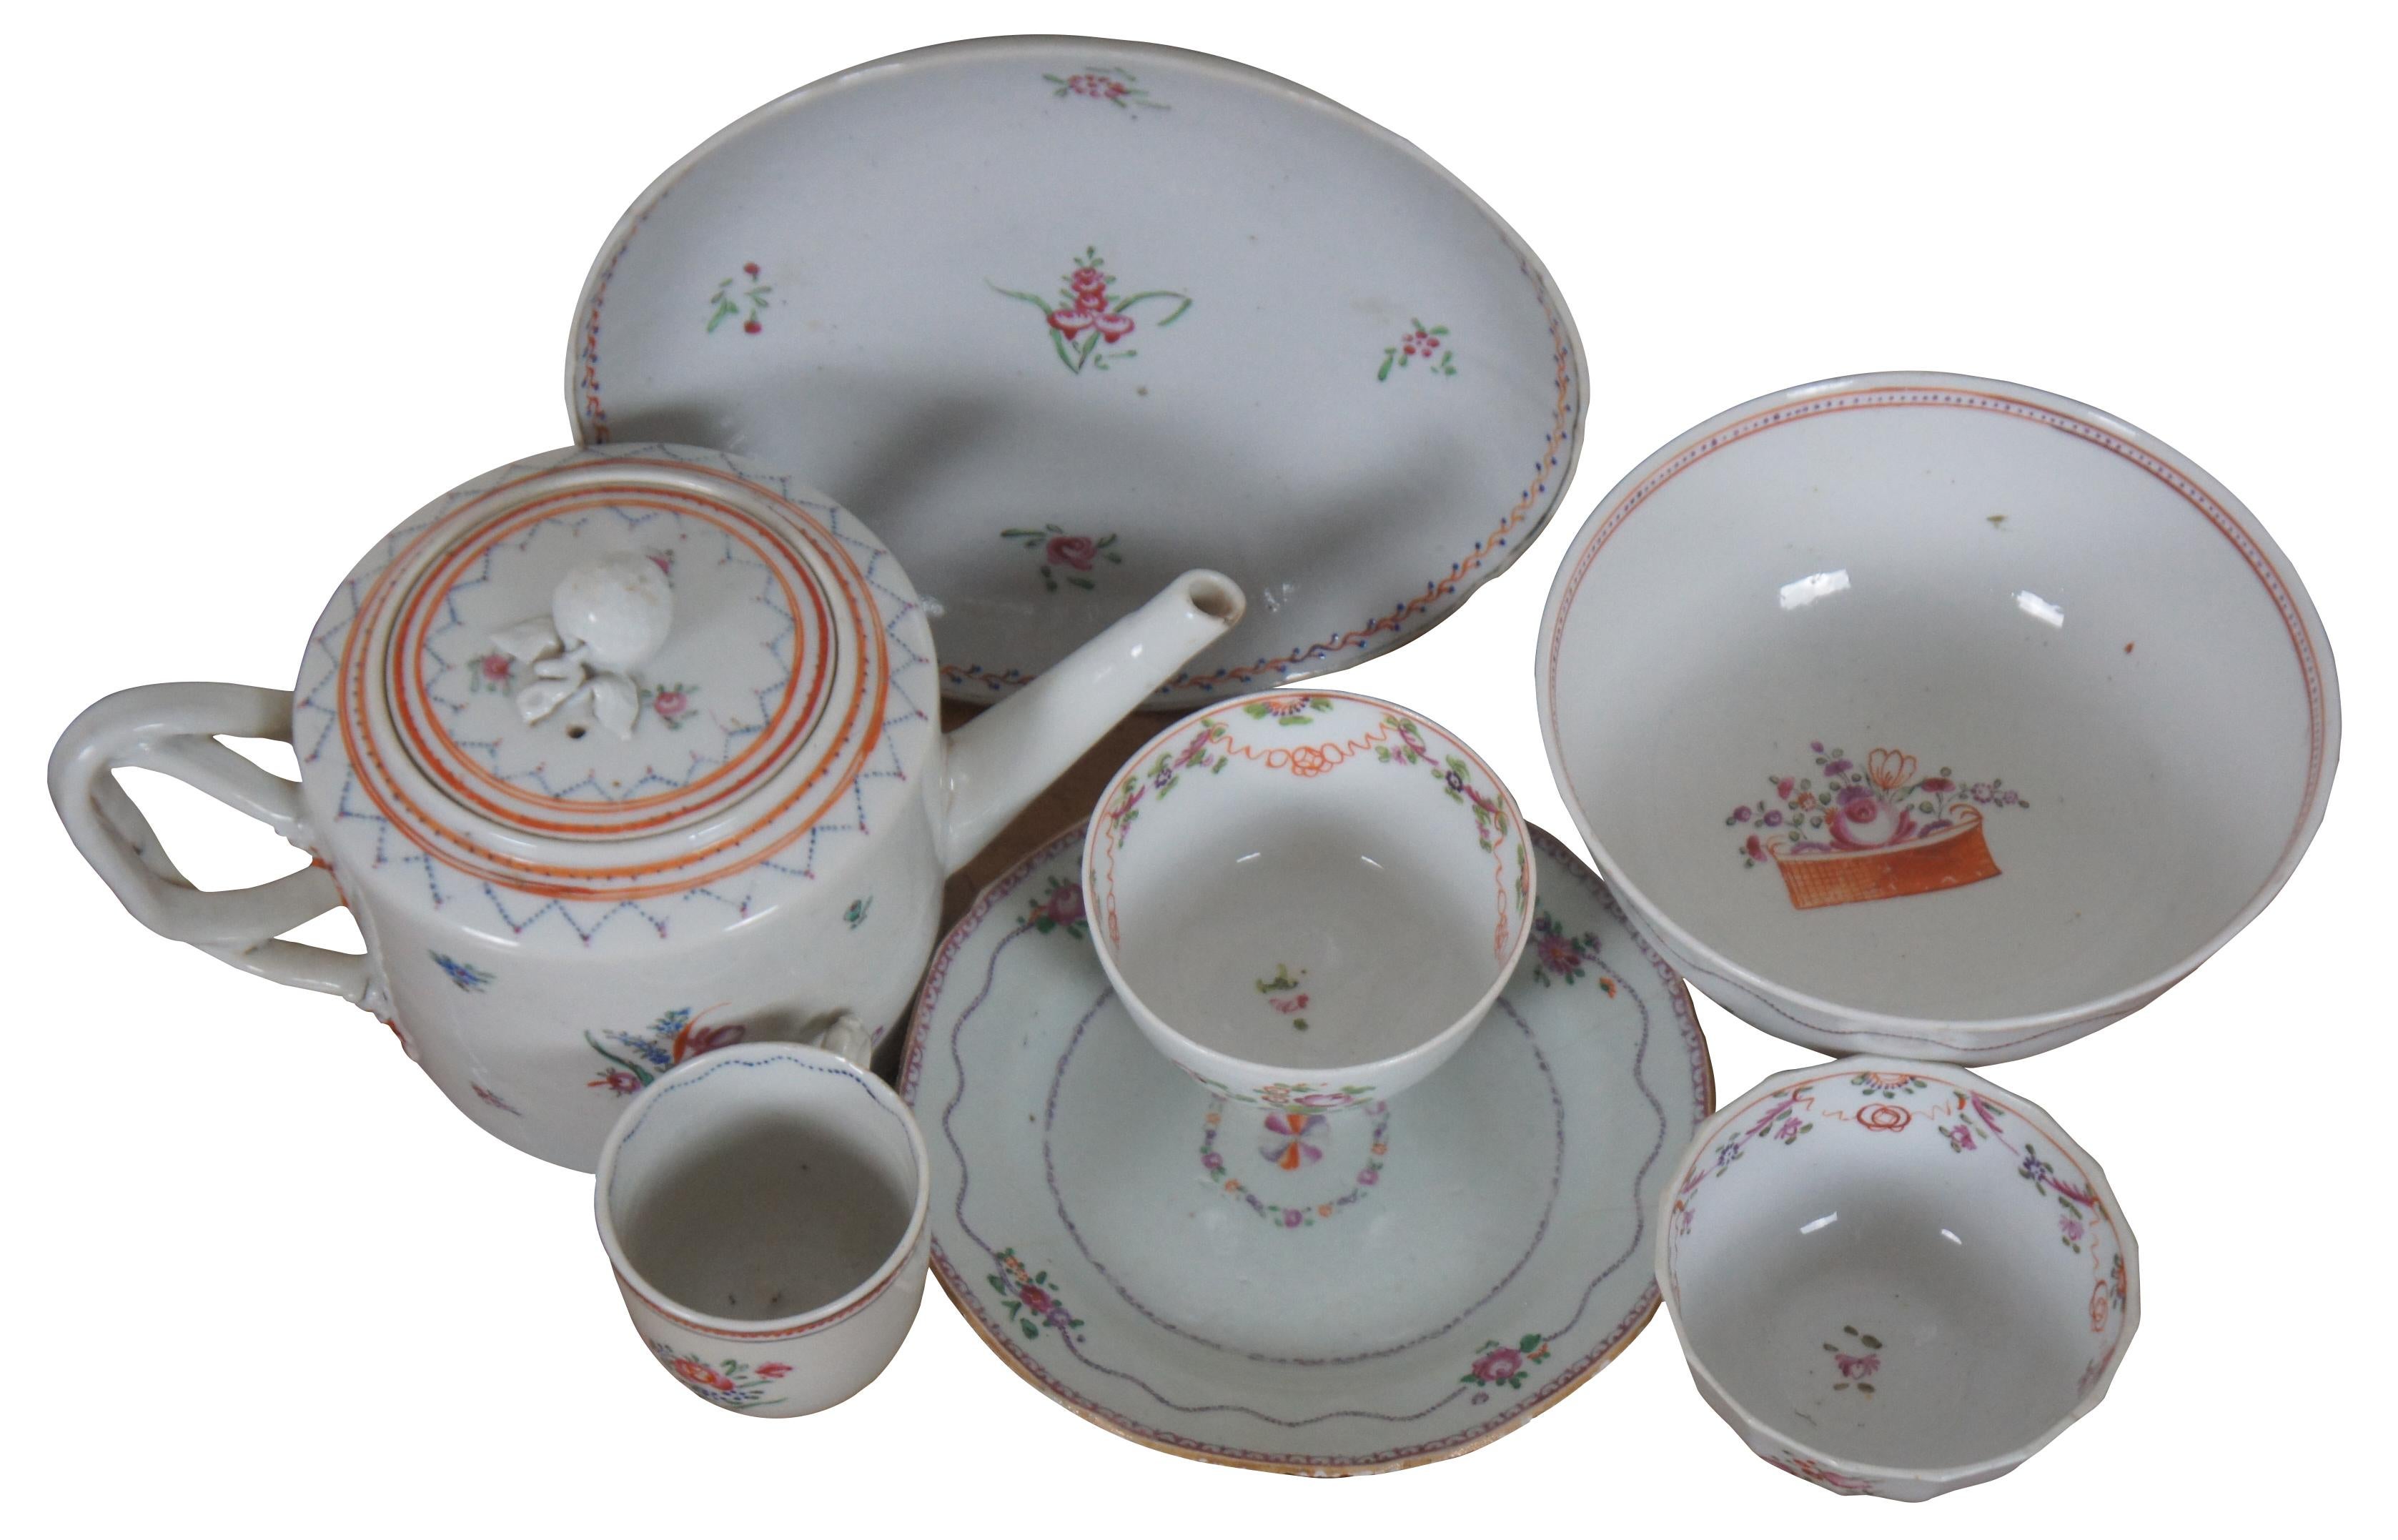 Lot of eight late 18th to early 19th century Chinese Export (Qianlong Period, circa 1780) porcelain serving pieces with hand painted floral and swags. Features teapot, tea / coffee cups, plate, soup bowl and shallow bowl.

Teapot - 9” x 5” x 5” /